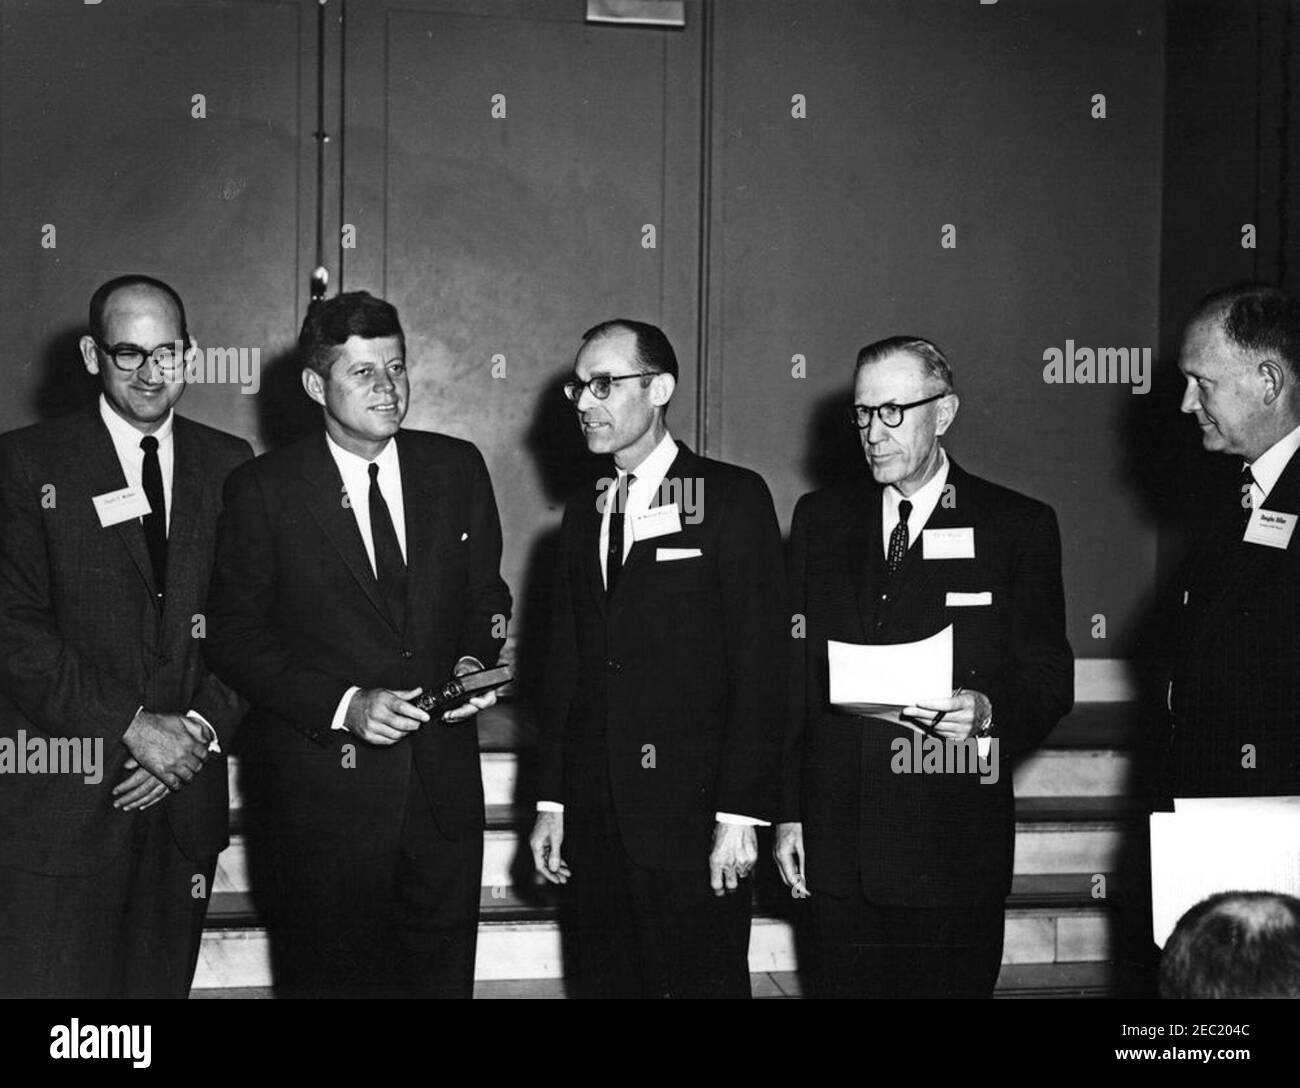 Address to the Symposium on Economic Growth, 9:53AM. President John F. Kennedy visits with participants of the American Bankers Association (ABA) Symposium on Economic Growth. Left to right: Executive Vice President of the ABA, Charls E. Walker; President Kennedy; Chairman of the First National Bank in Thomson, Georgia, M. Monroe Kimbrel; Chairman of the First National Bank in Dallas, Ben H. Wooten; Secretary of the Treasury C. Douglas Dillon. Mayflower Hotel, Washington, D.C. Stock Photo